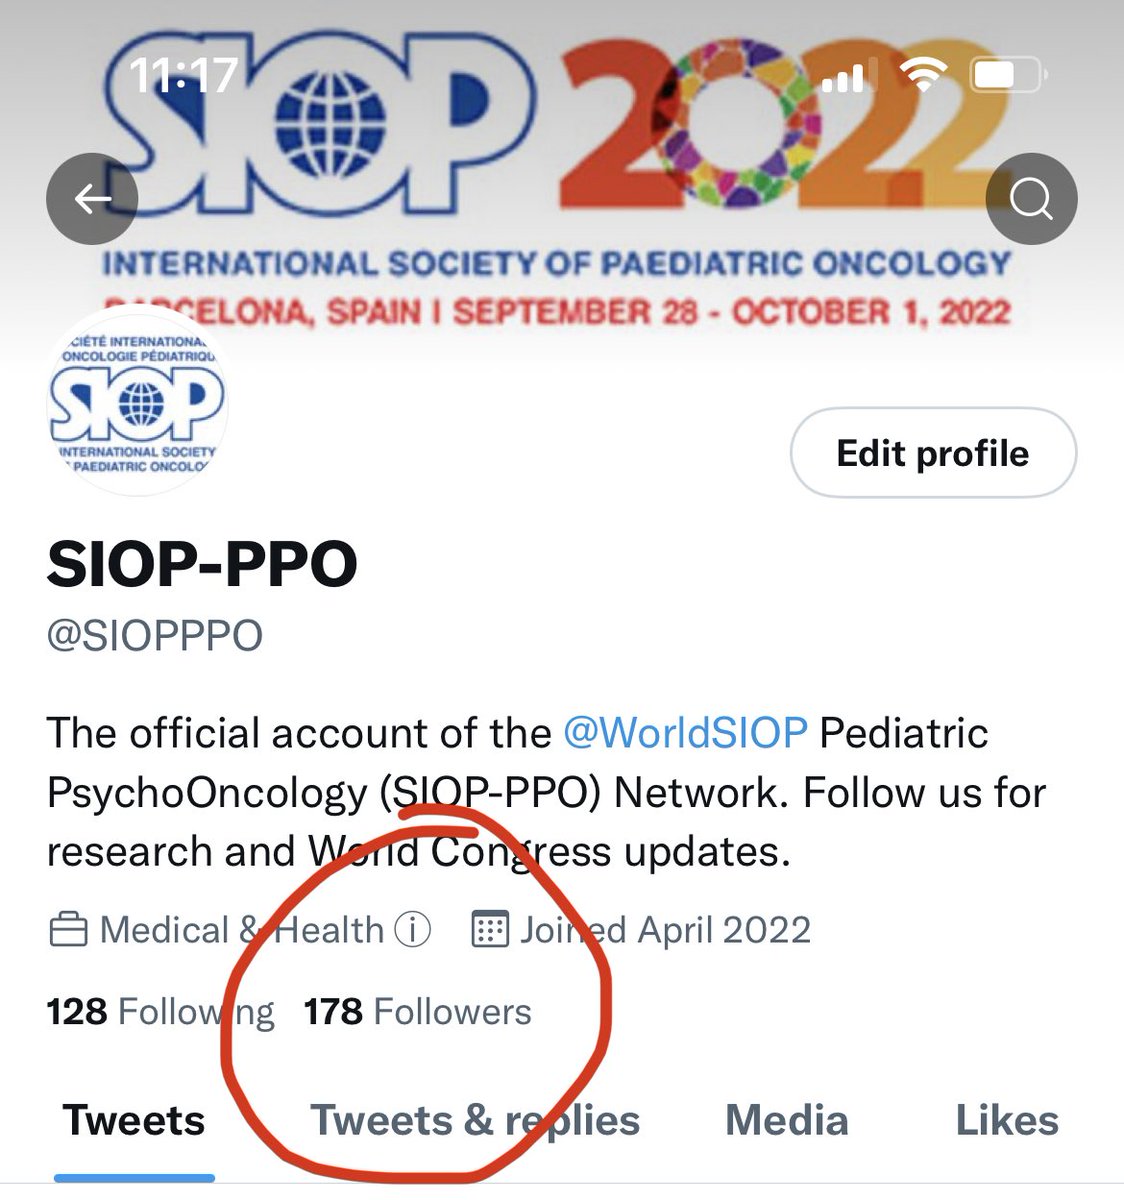 ⁦@SIOPPPO⁩ is at 178 followers!! Would be great to reach >200 before the end of ⁦@WorldSIOP⁩ #SIOP2022. If you have not heard: this is the official account of the SIOP Pediatric Psycho-Oncology Network. Follow us for psychosocial research & updates from the network!